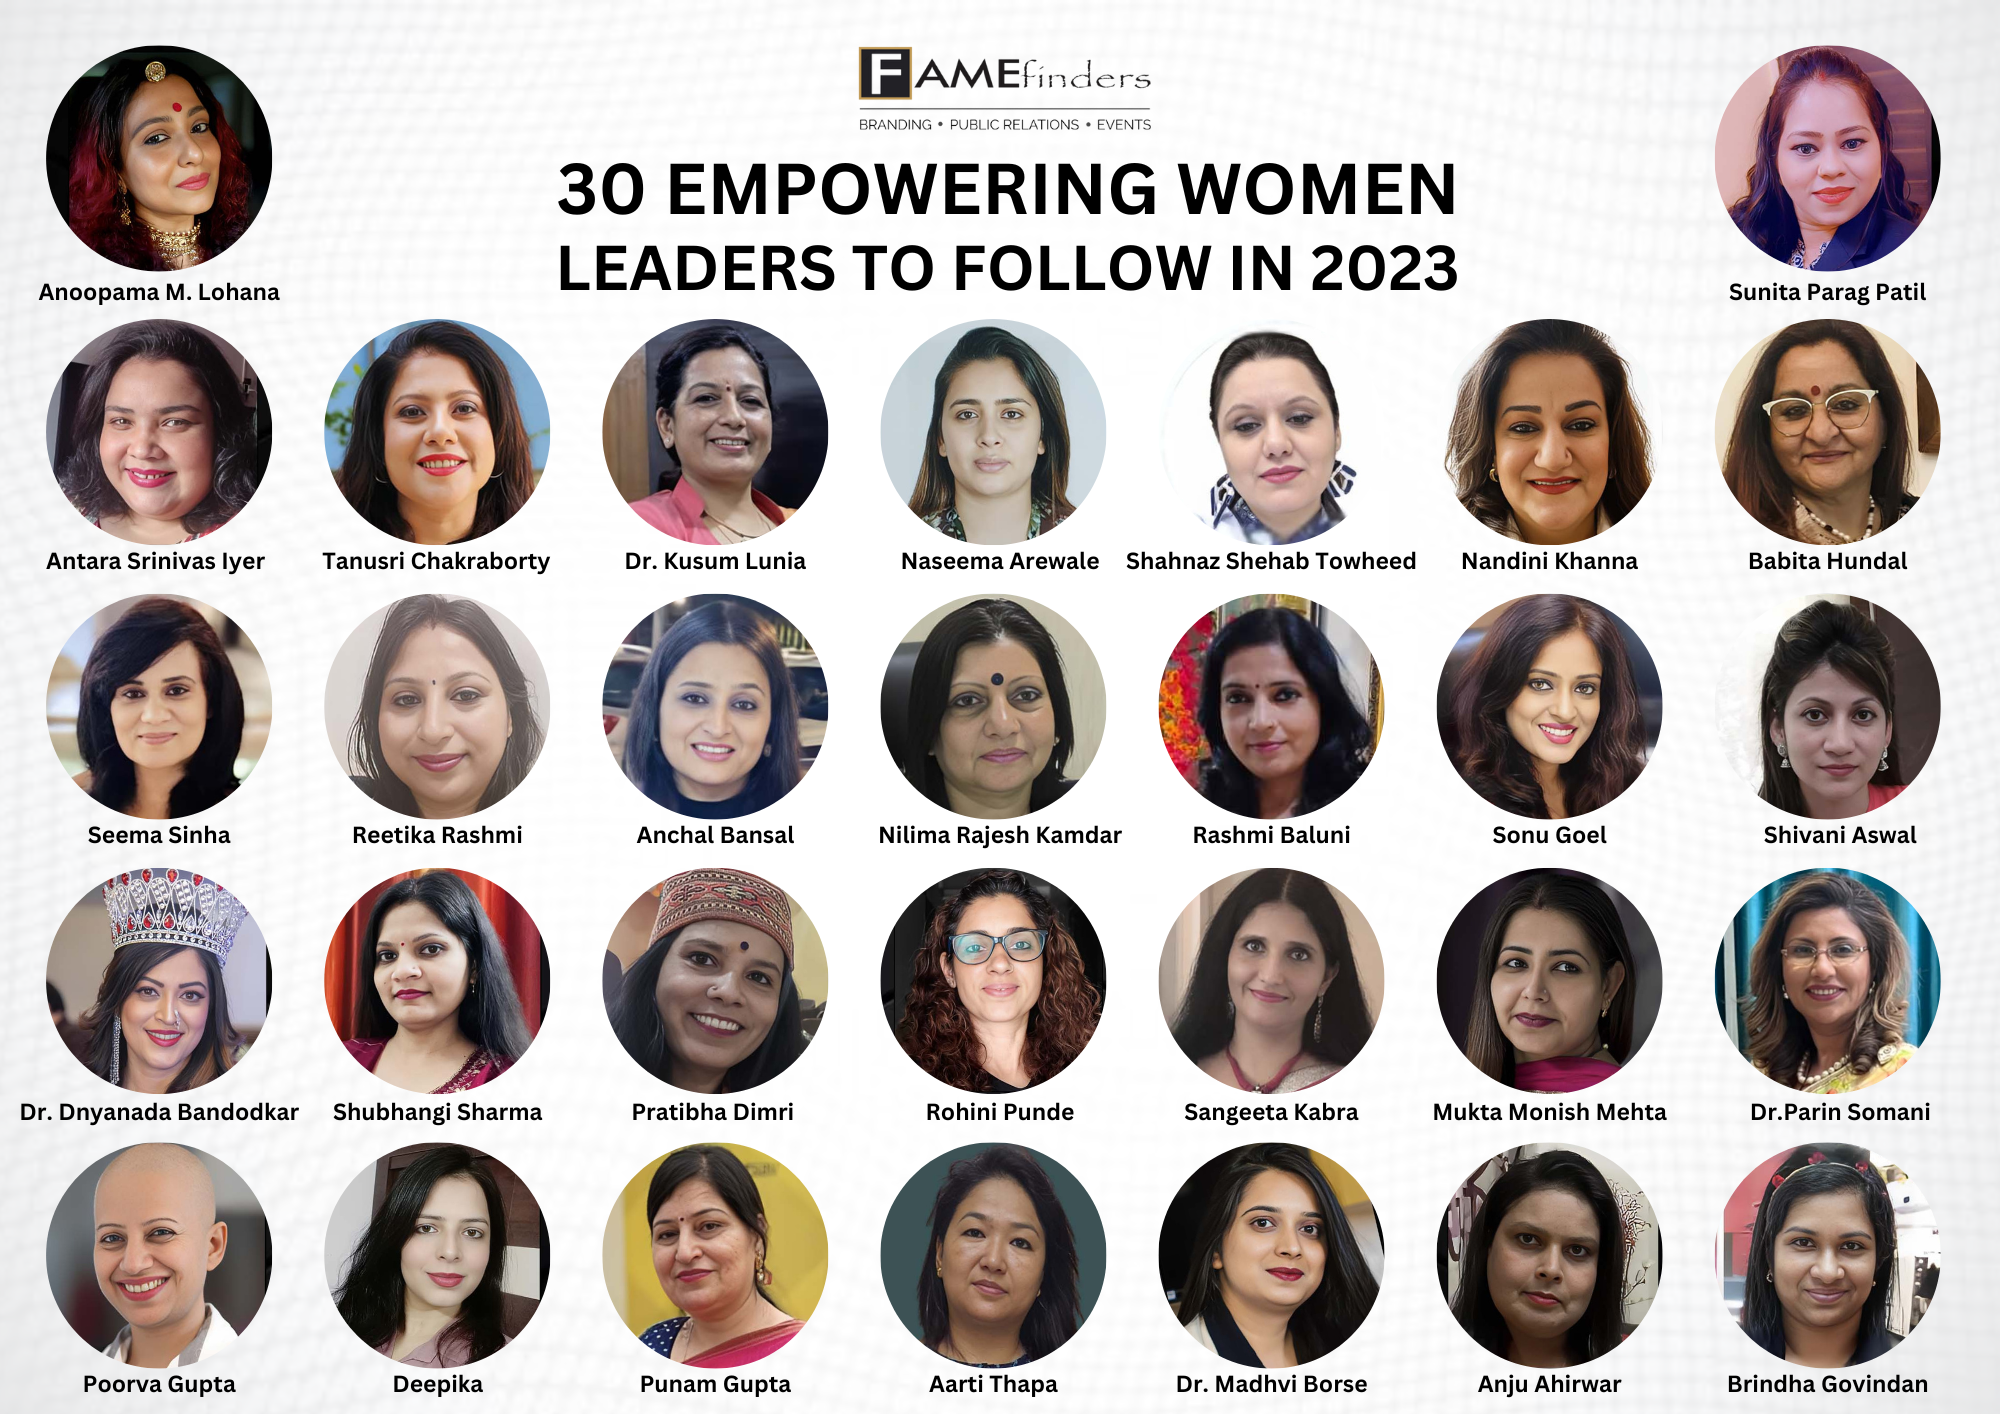 30 Empowering Women Leaders To Follow In 2023 announced by Fame Finders